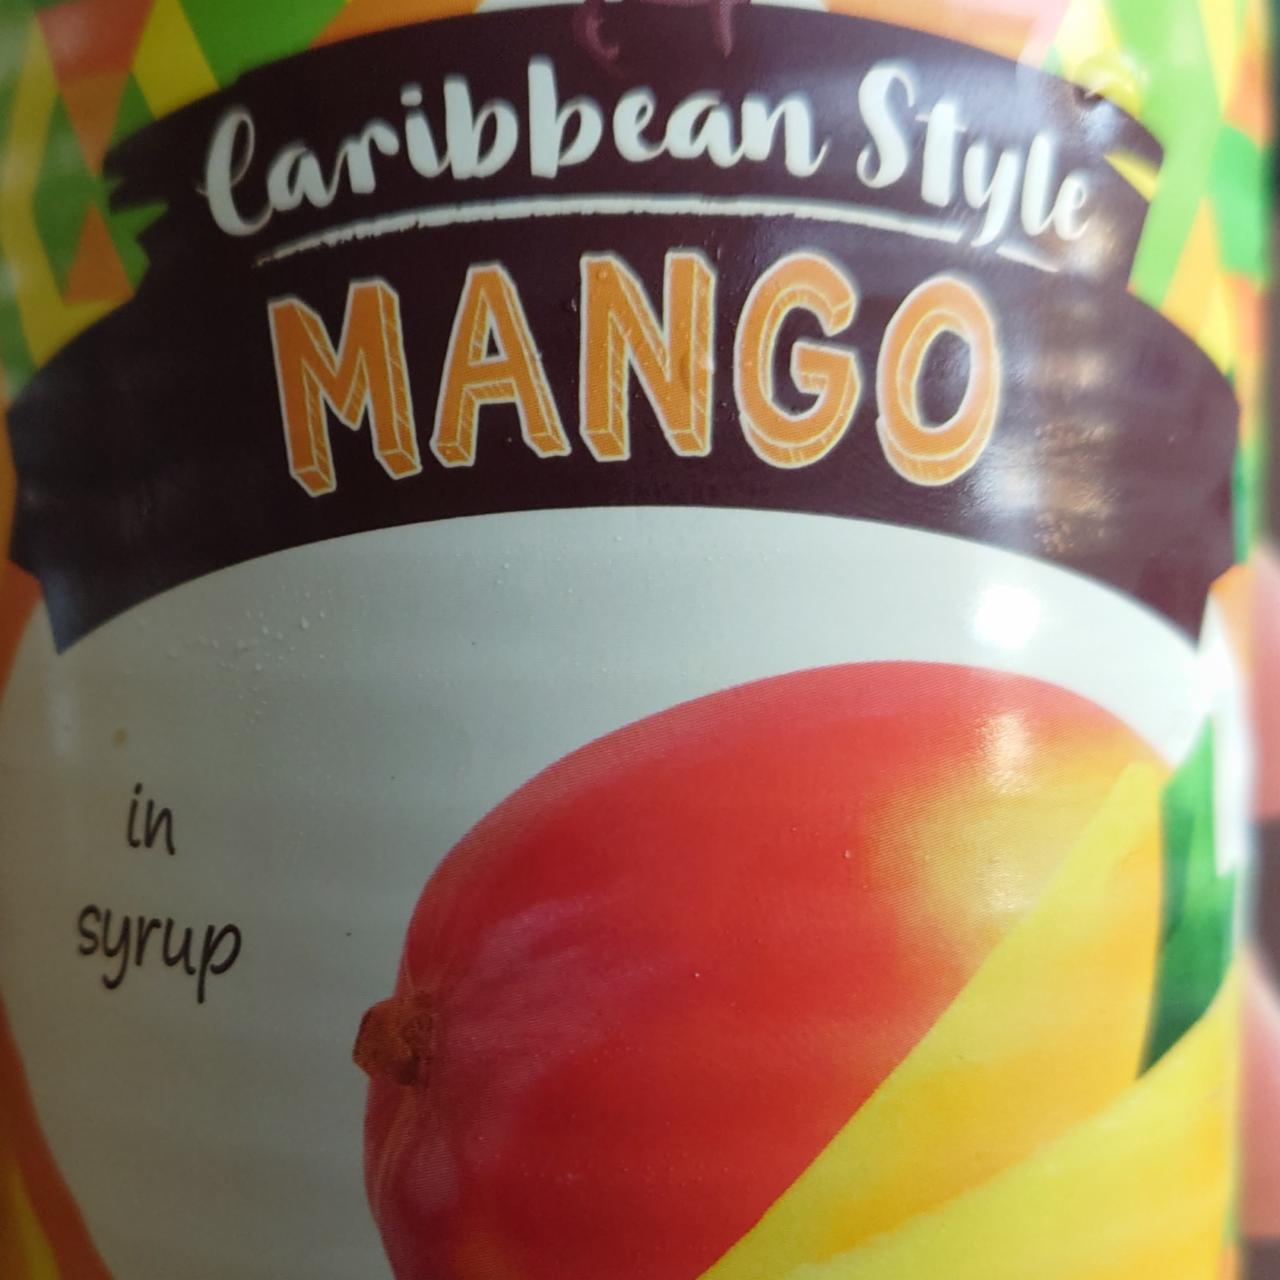 Fotografie - Mango in syrup Caribbean Style